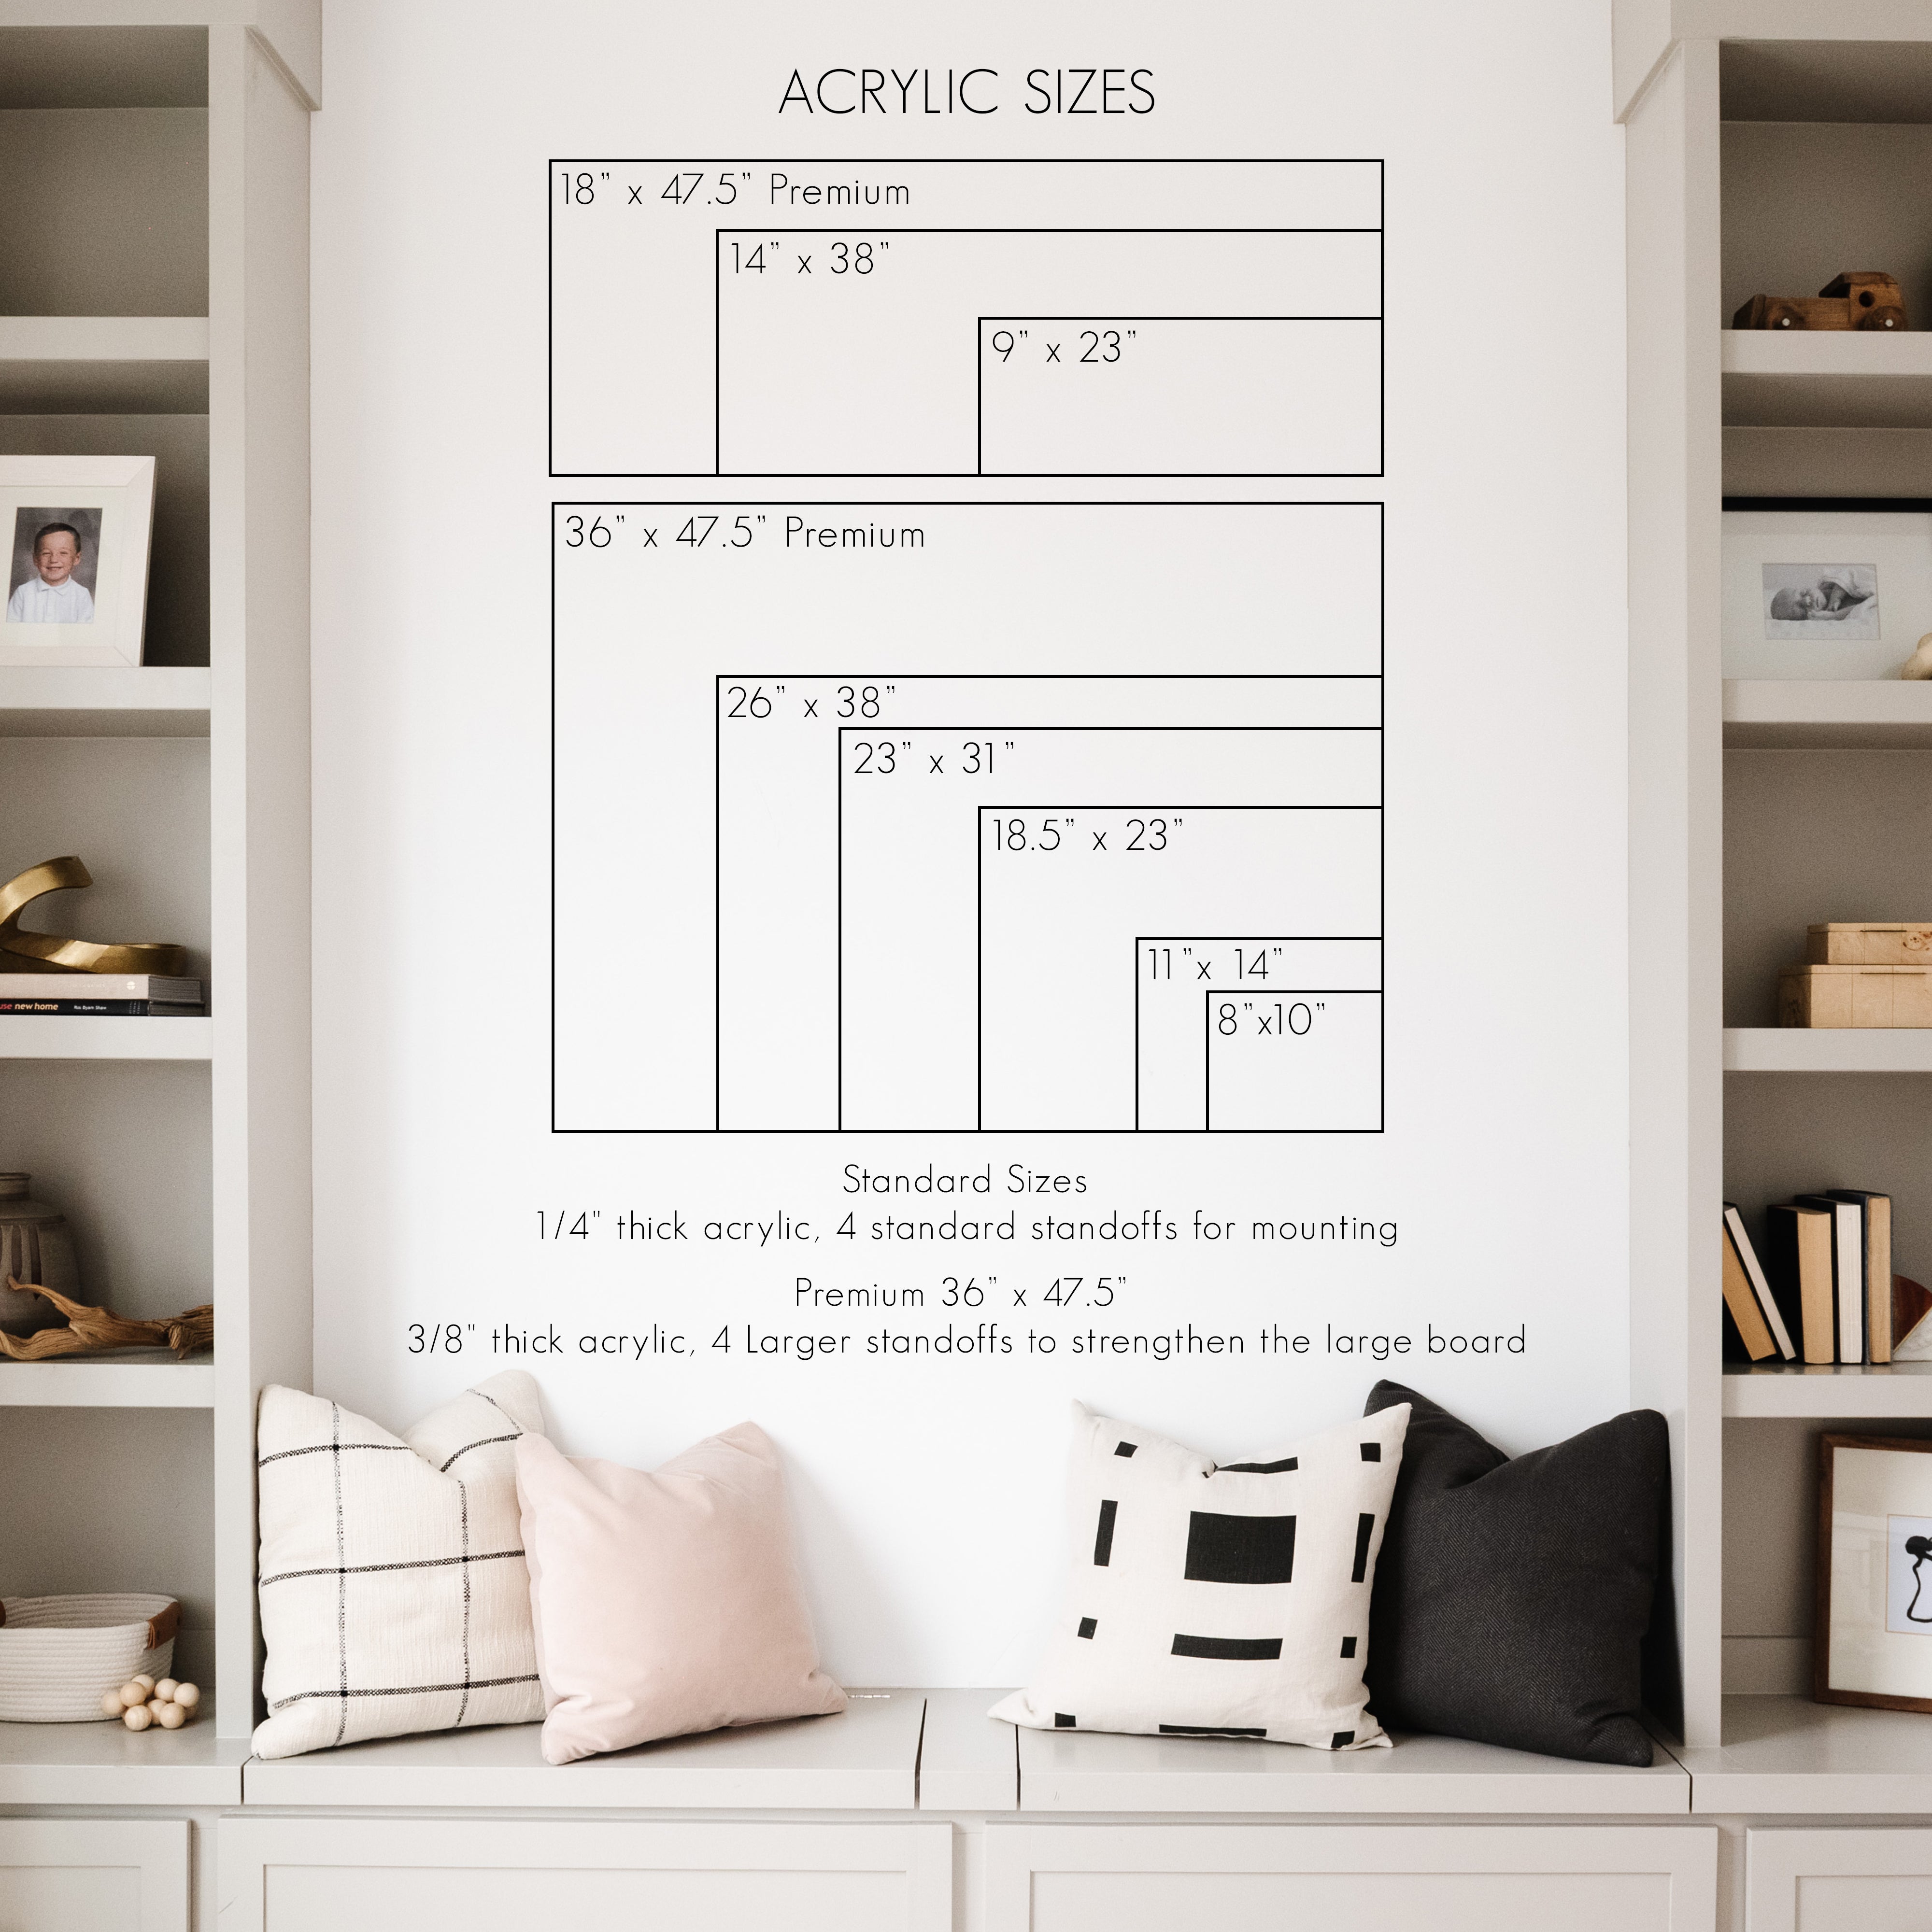 Monthly Frosted Acrylic Calendar + 1 Section | Horizontal Pennington